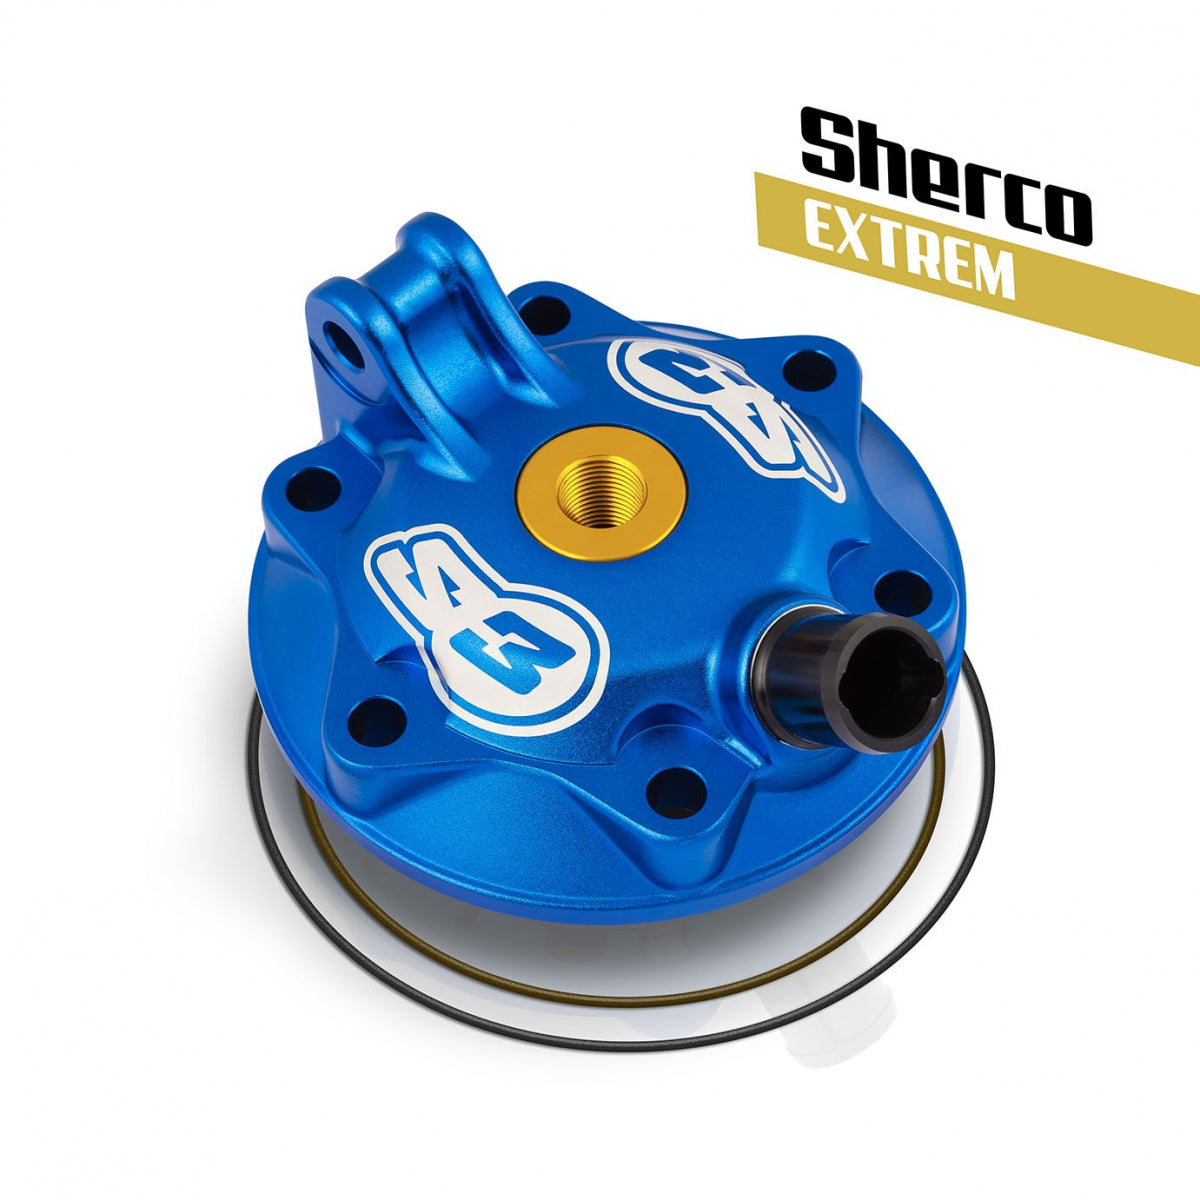 Extreme Cylinder Head - Sherco